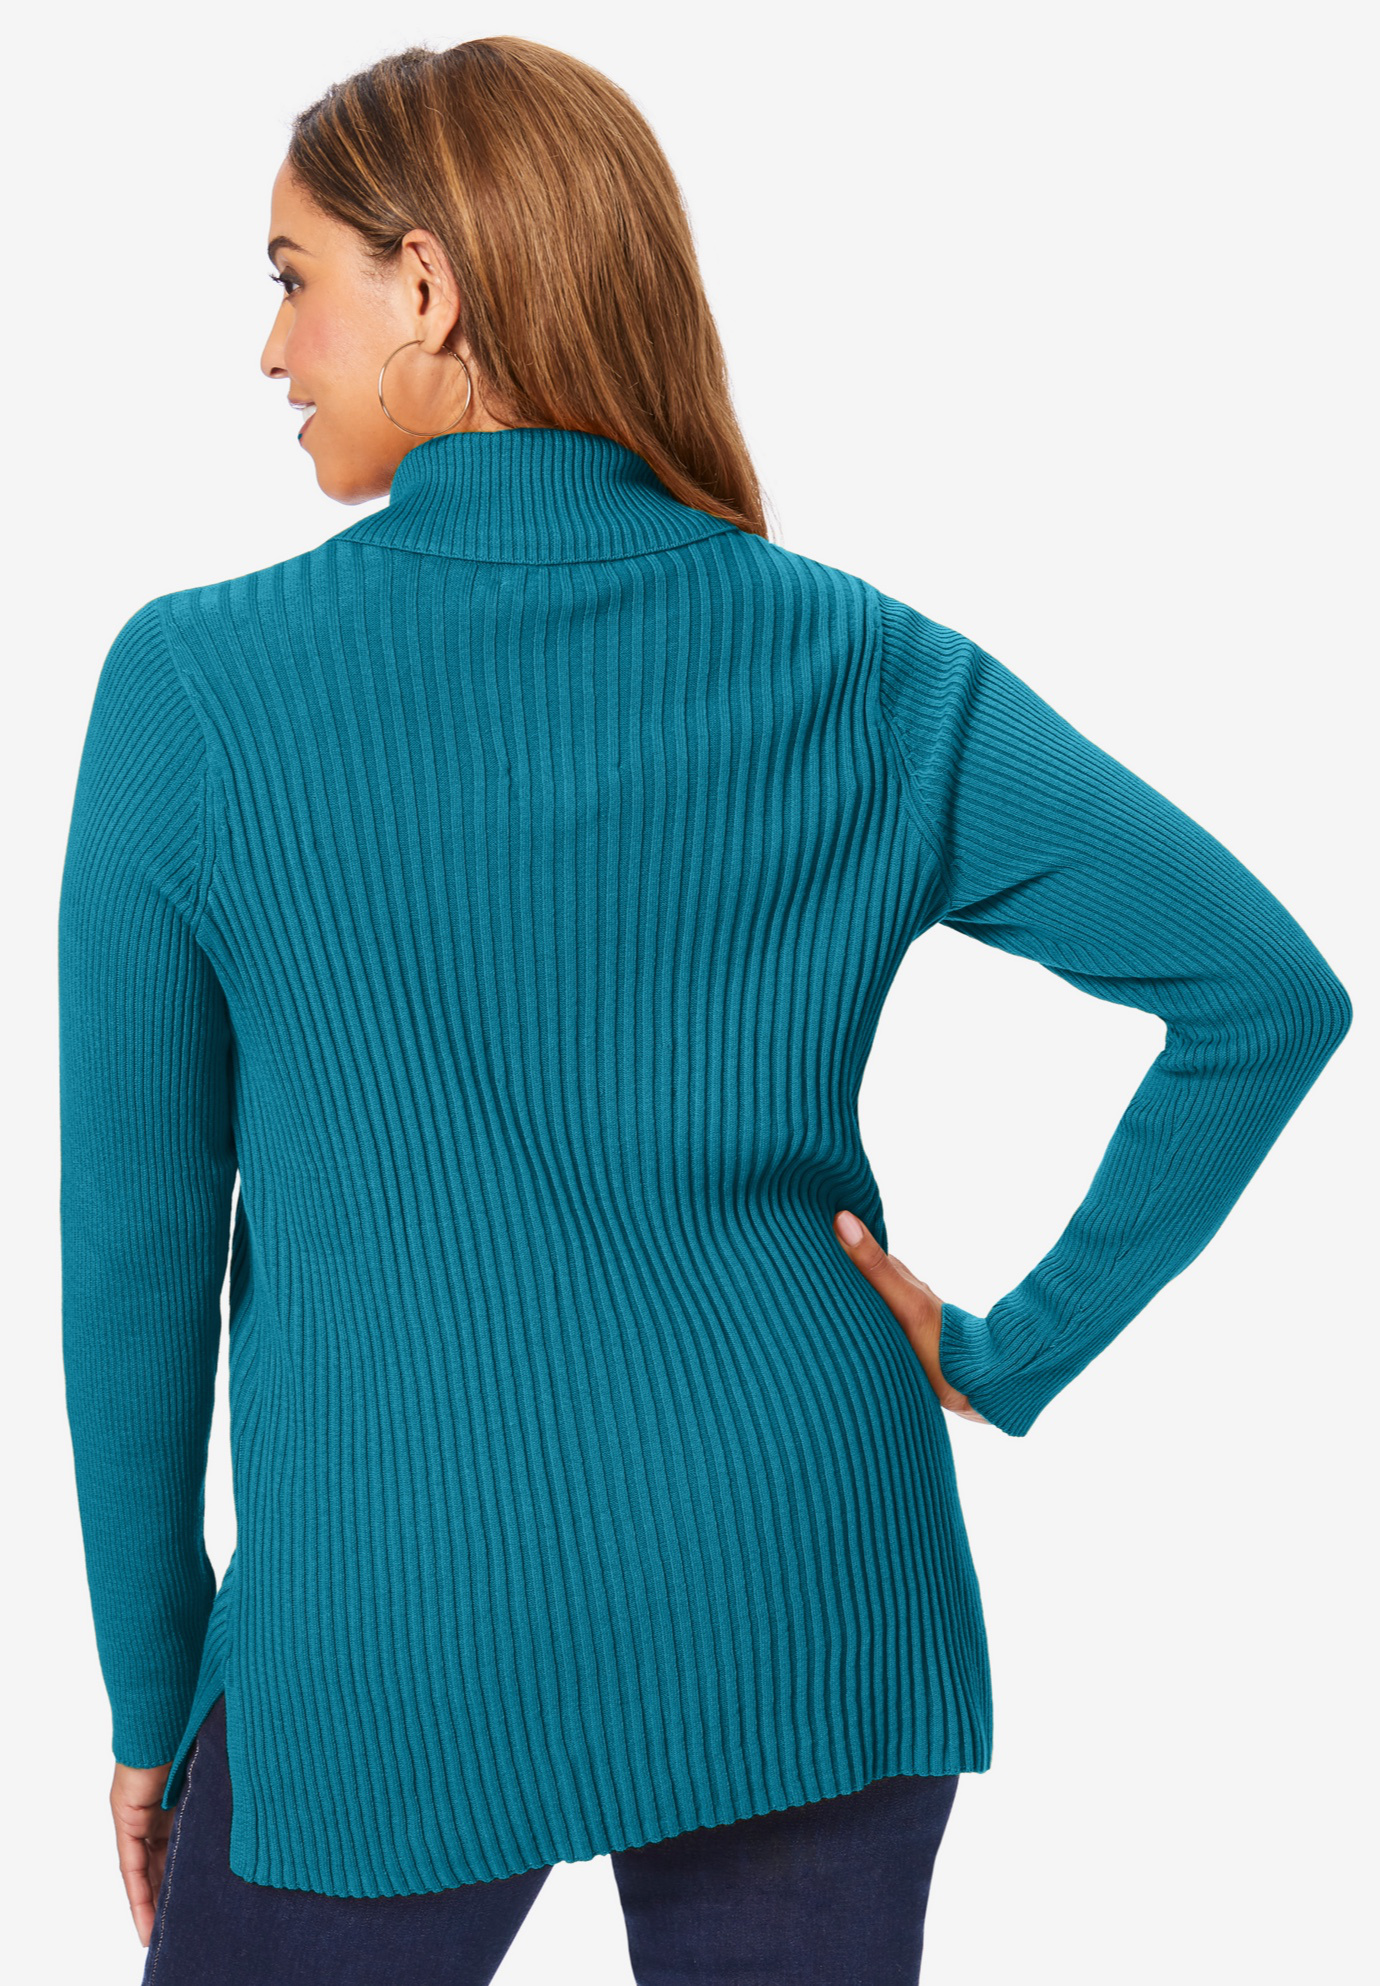 Jessica London Women's Plus Size Ribbed Collar Sweater - image 3 of 4